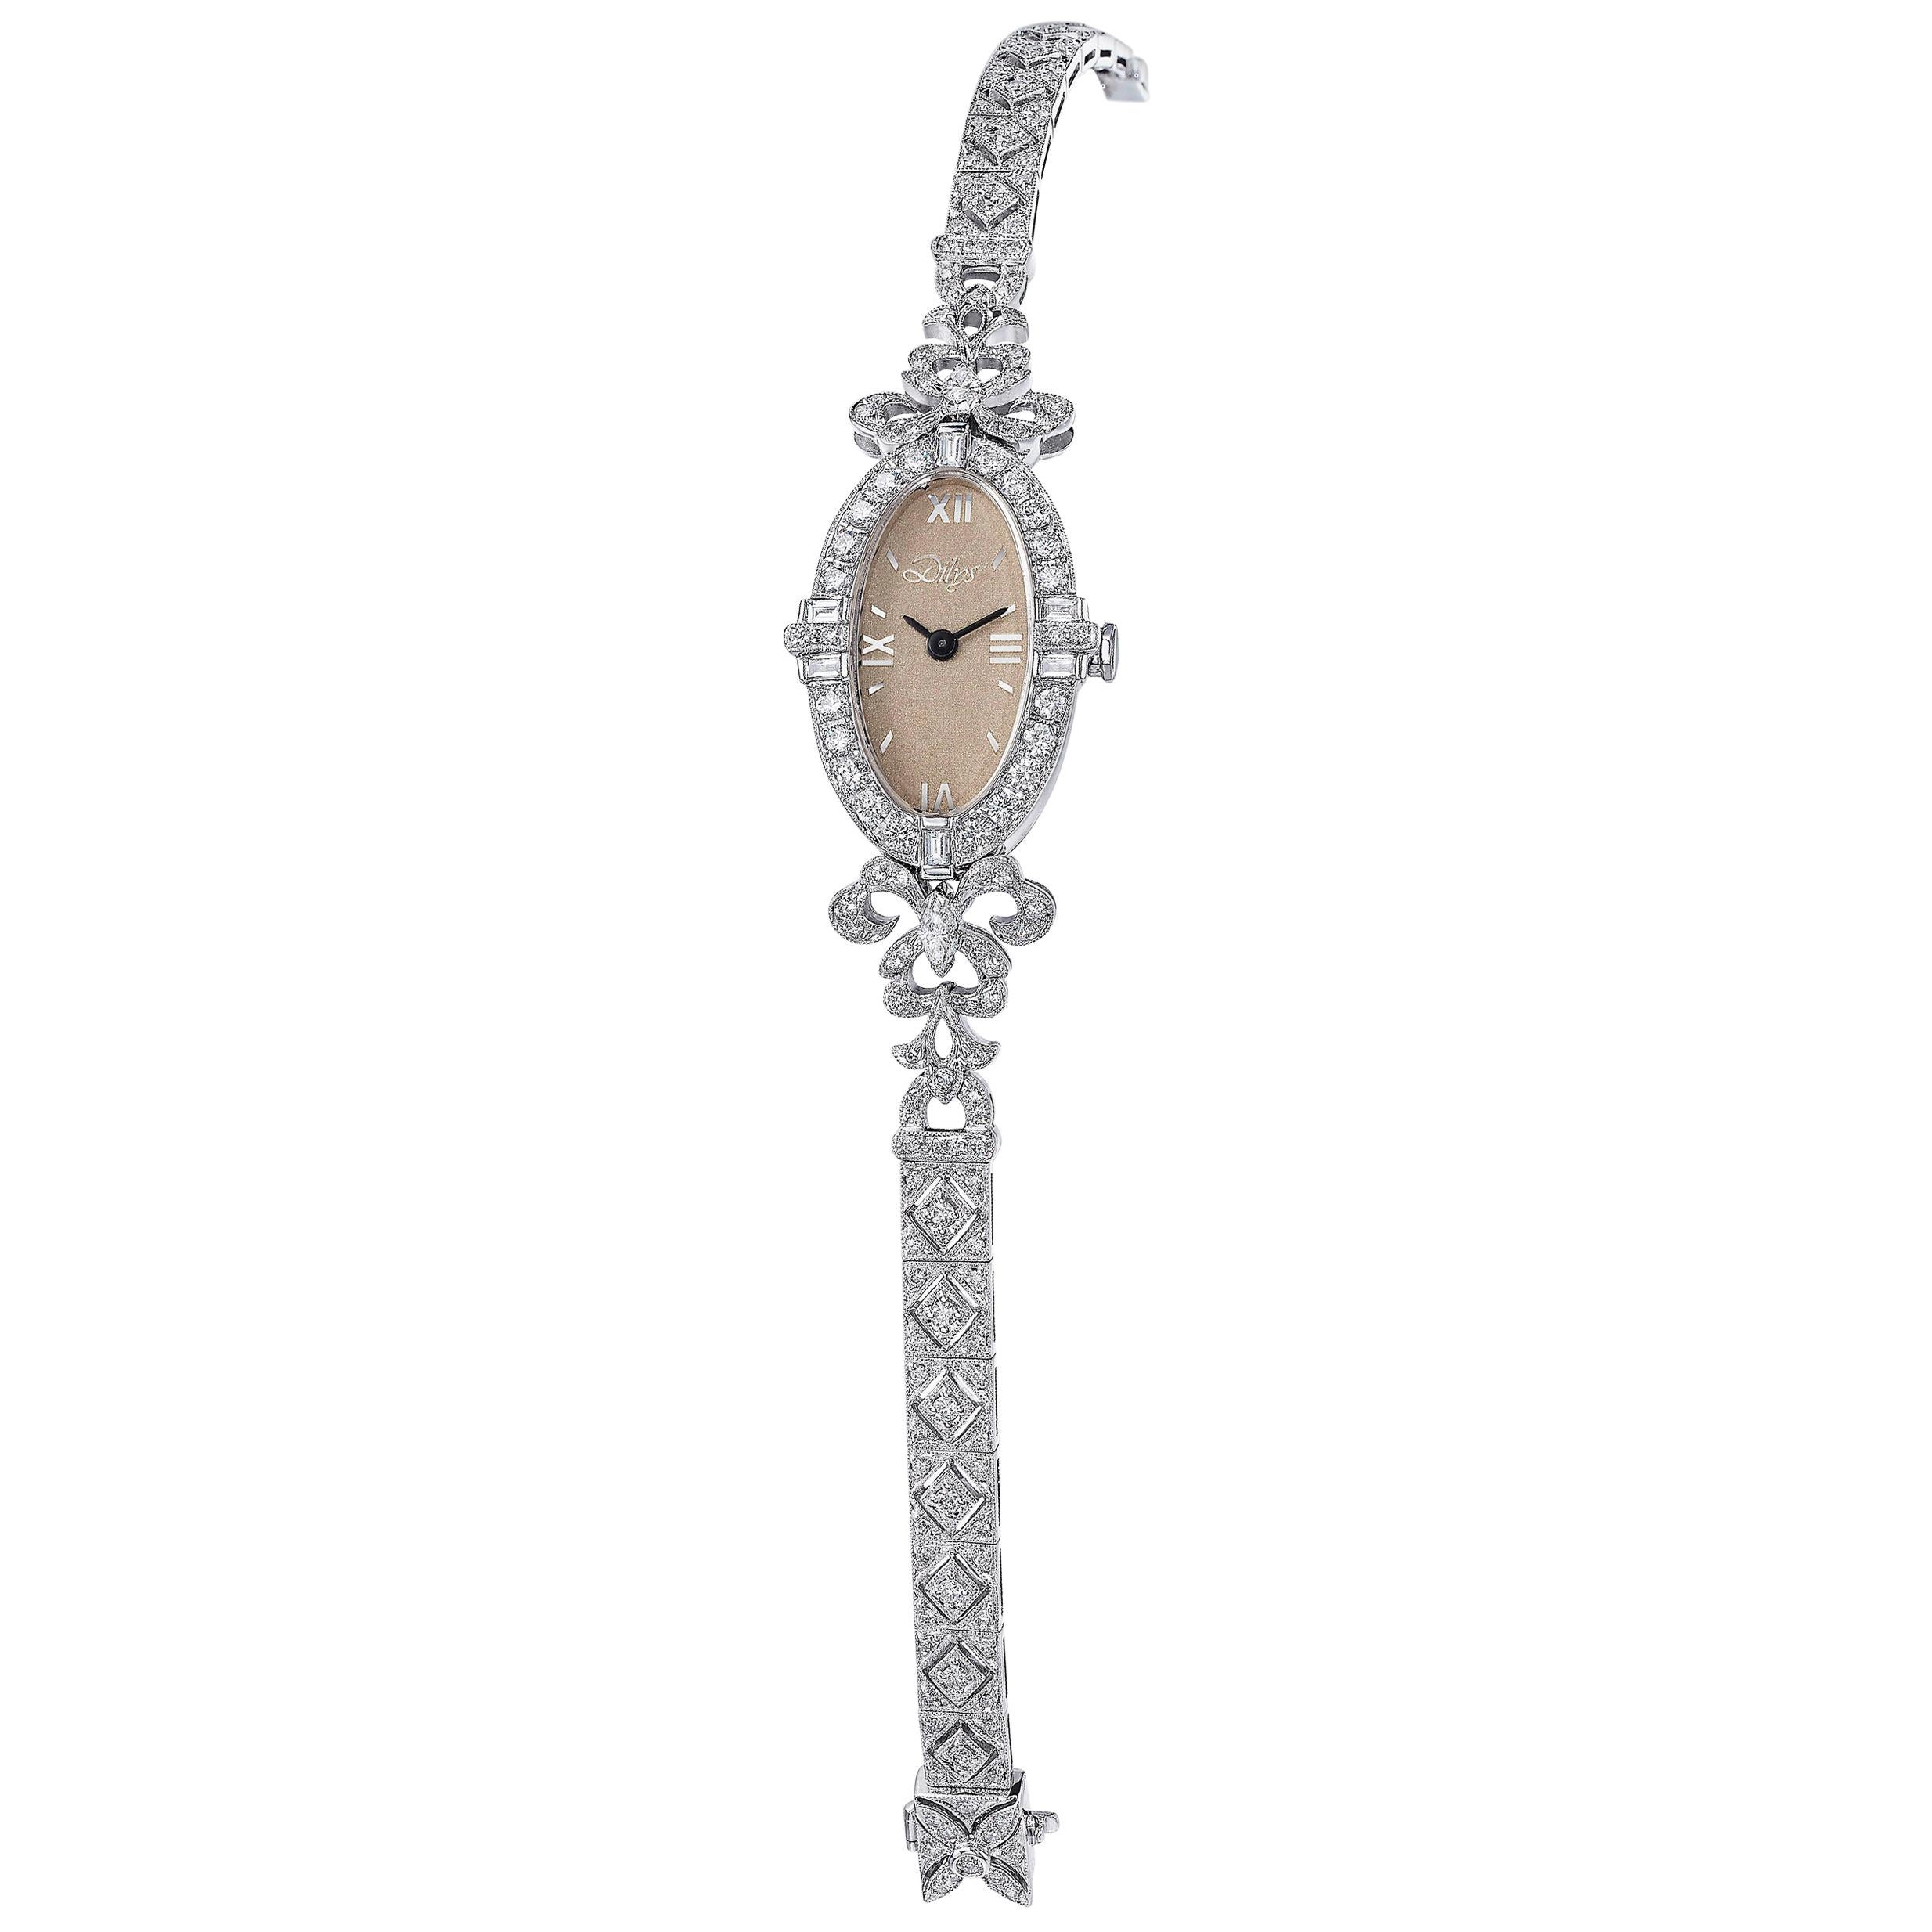 Inspired by the Art Deco movement, Dilys’ exceptional Swiss quartz movement diamond watch in 18 karat gold exhibits beautiful intricacy with detailed cutouts and outlines throughout. This timepiece speaks for itself and is a work of wearable art.